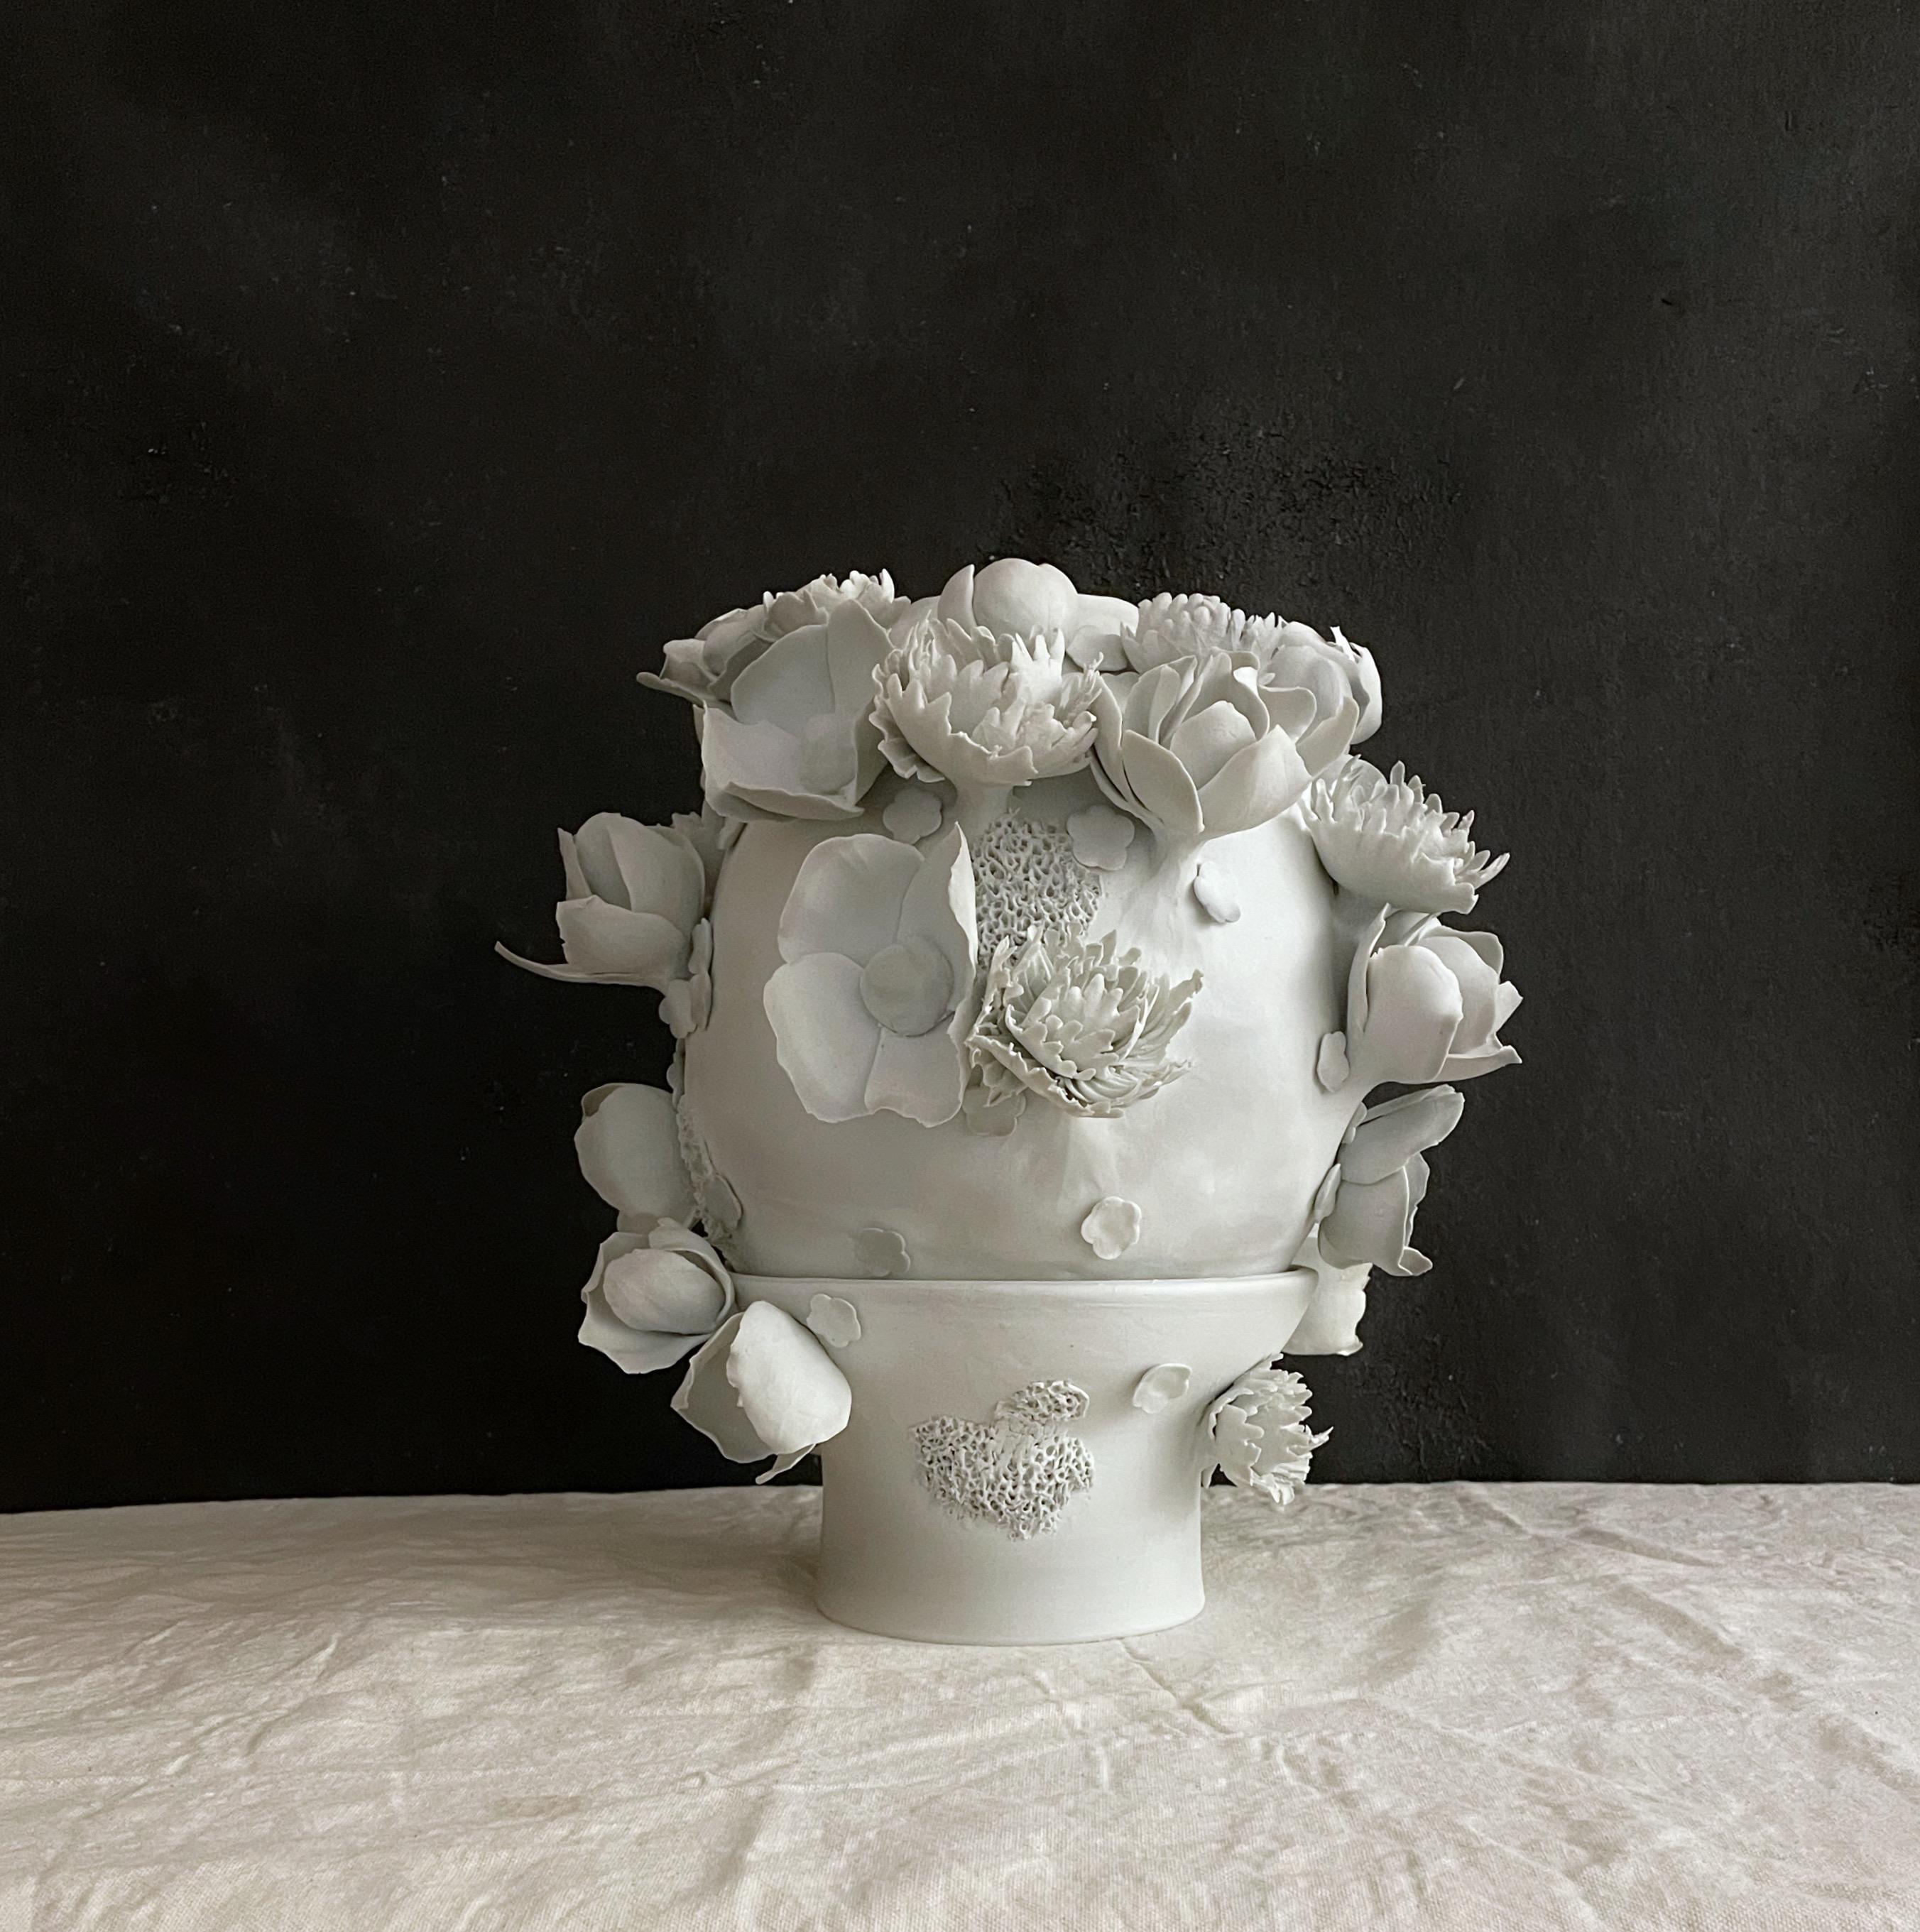 This one of a kind, two piece sculpture hand built and decorated with porcelain flowers and finished with the pure porcelain touch with only glaze inside.

Dear You Ceramics is a Brooklyn based ceramic studio specializing in creating sculptural,